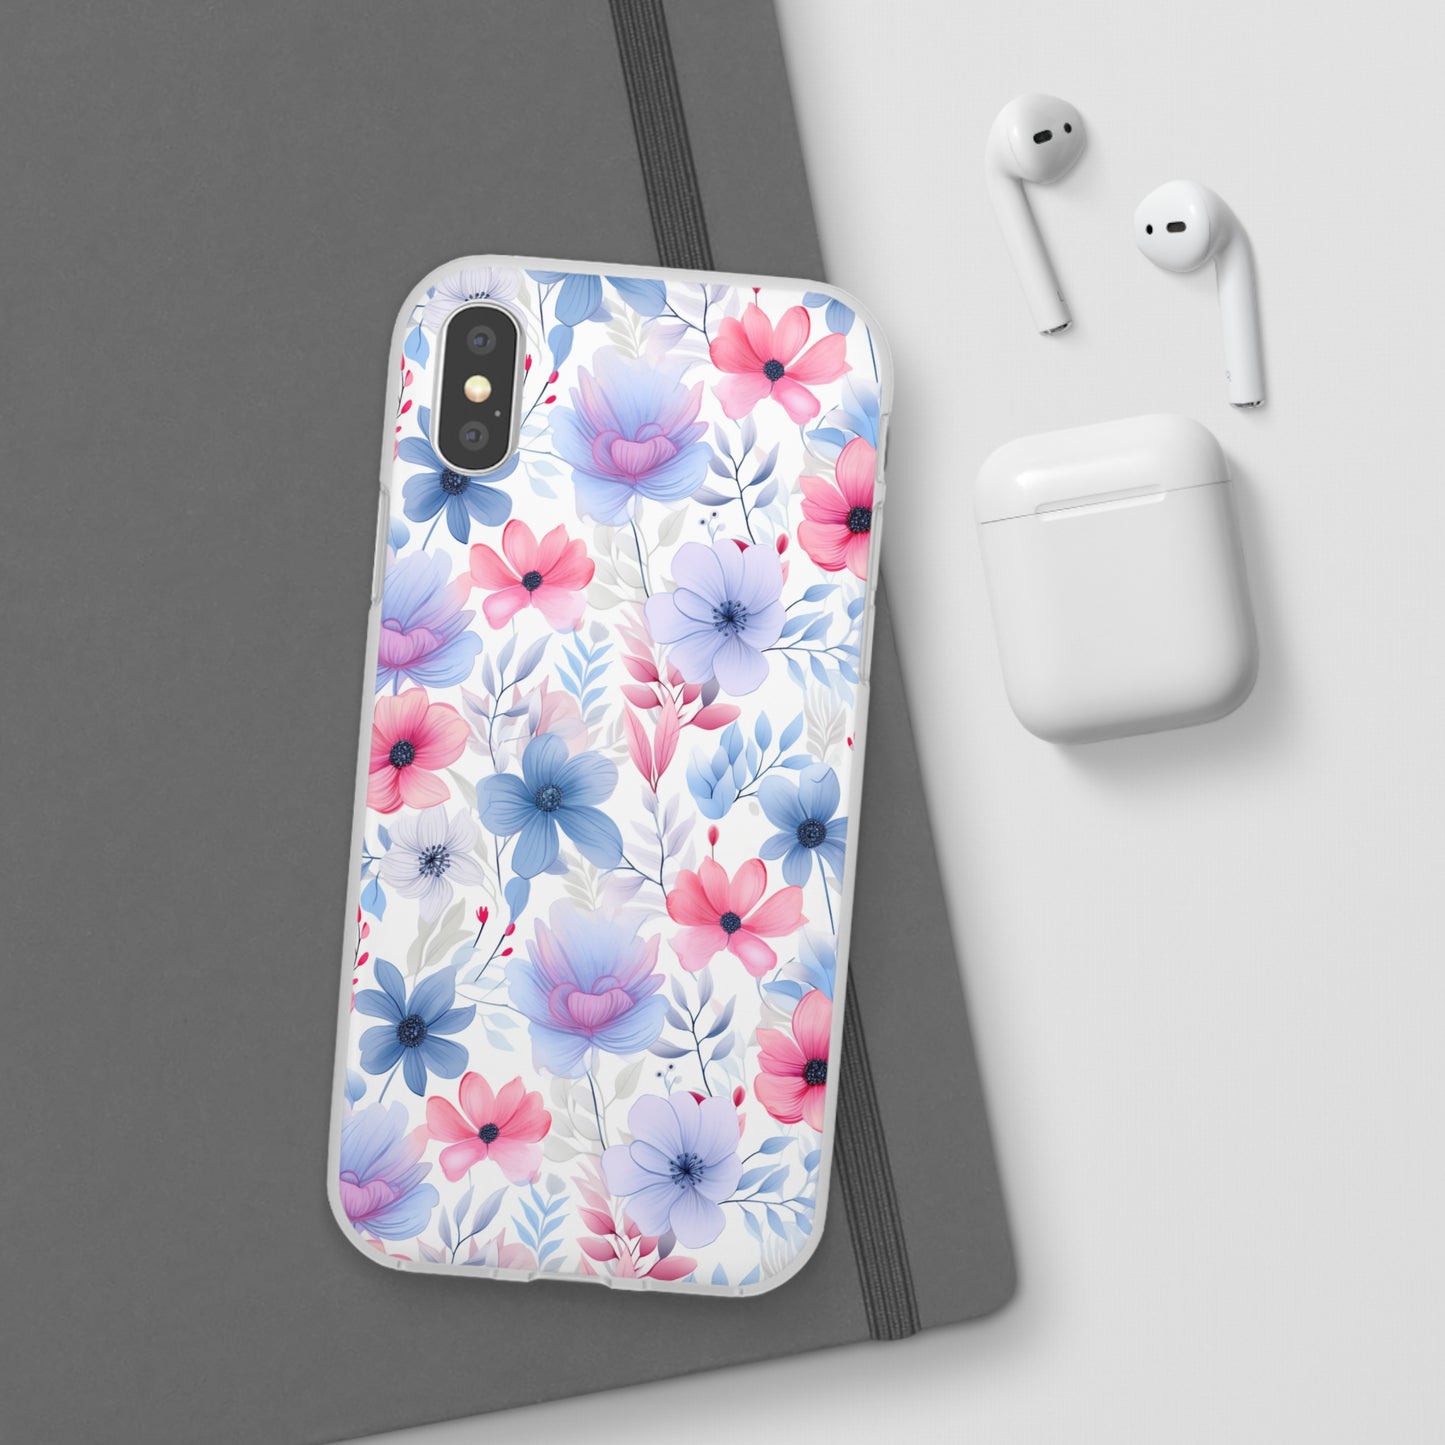 Floral Whispers - Soft Hues of Violets, Pinks, and Blues - Flexi Phone Case Phone Case Pattern Symphony iPhone X  